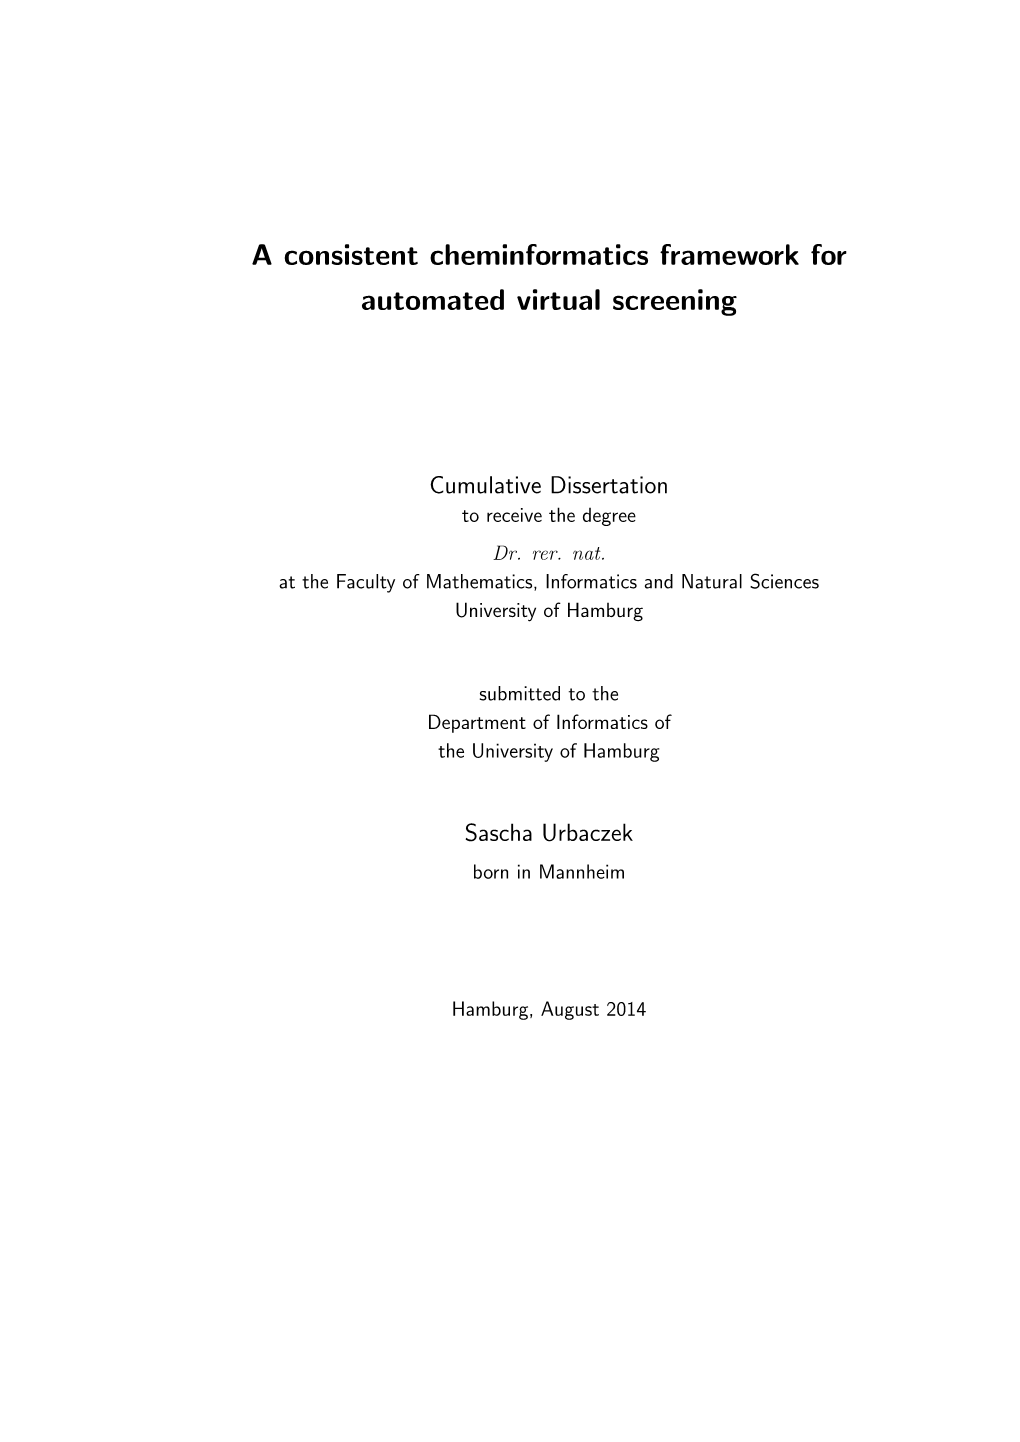 A Consistent Cheminformatics Framework for Automated Virtual Screening